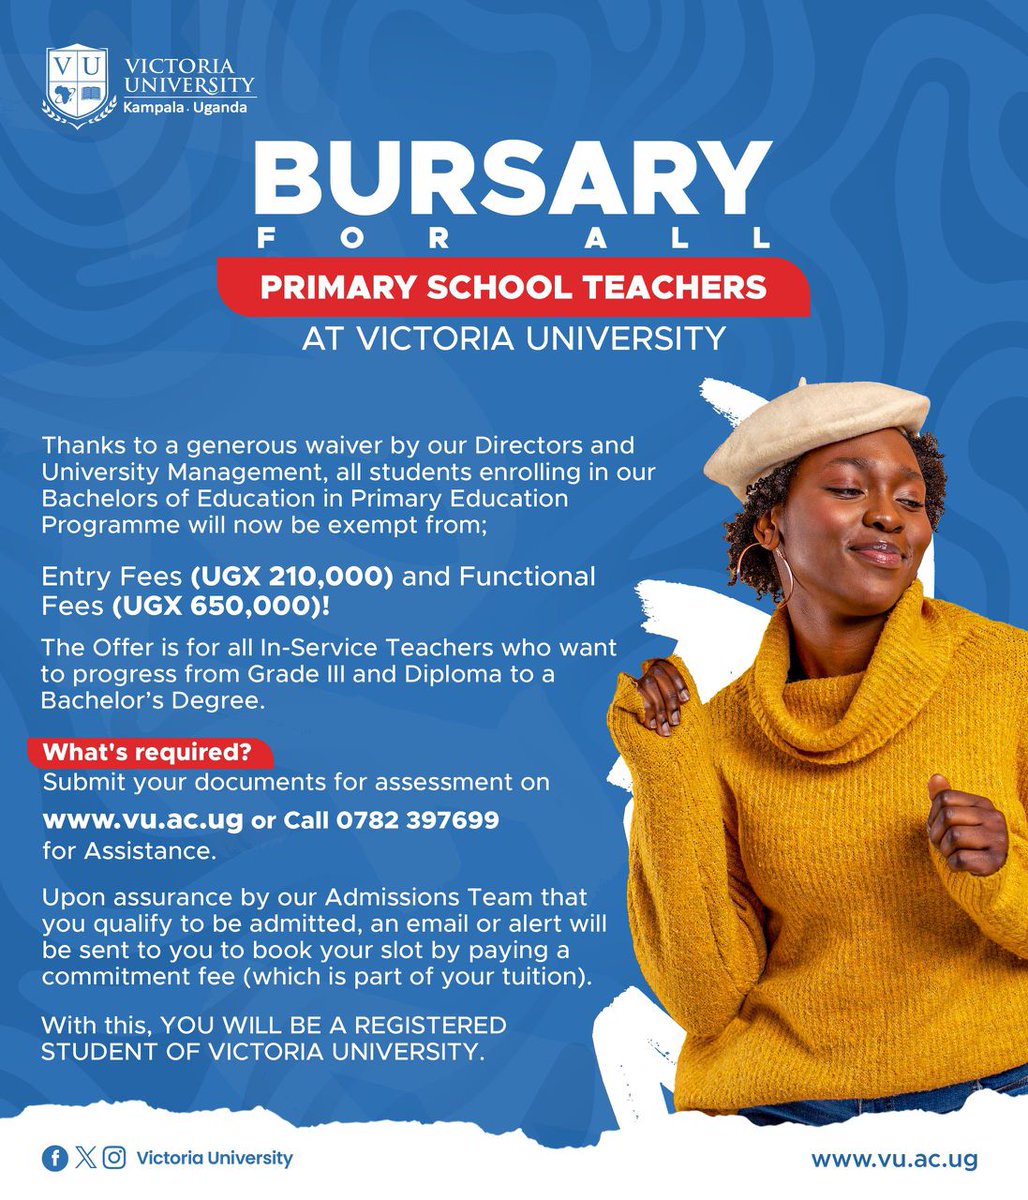 We are on a mission to shape the future, ONE TEACHER, AT A TIME. At Victoria University, we believe in empowering educators. Know a dedicated primary school teacher or school making a difference? Tag them to let them know about our Bursary for all Primary School Teachers. Let's